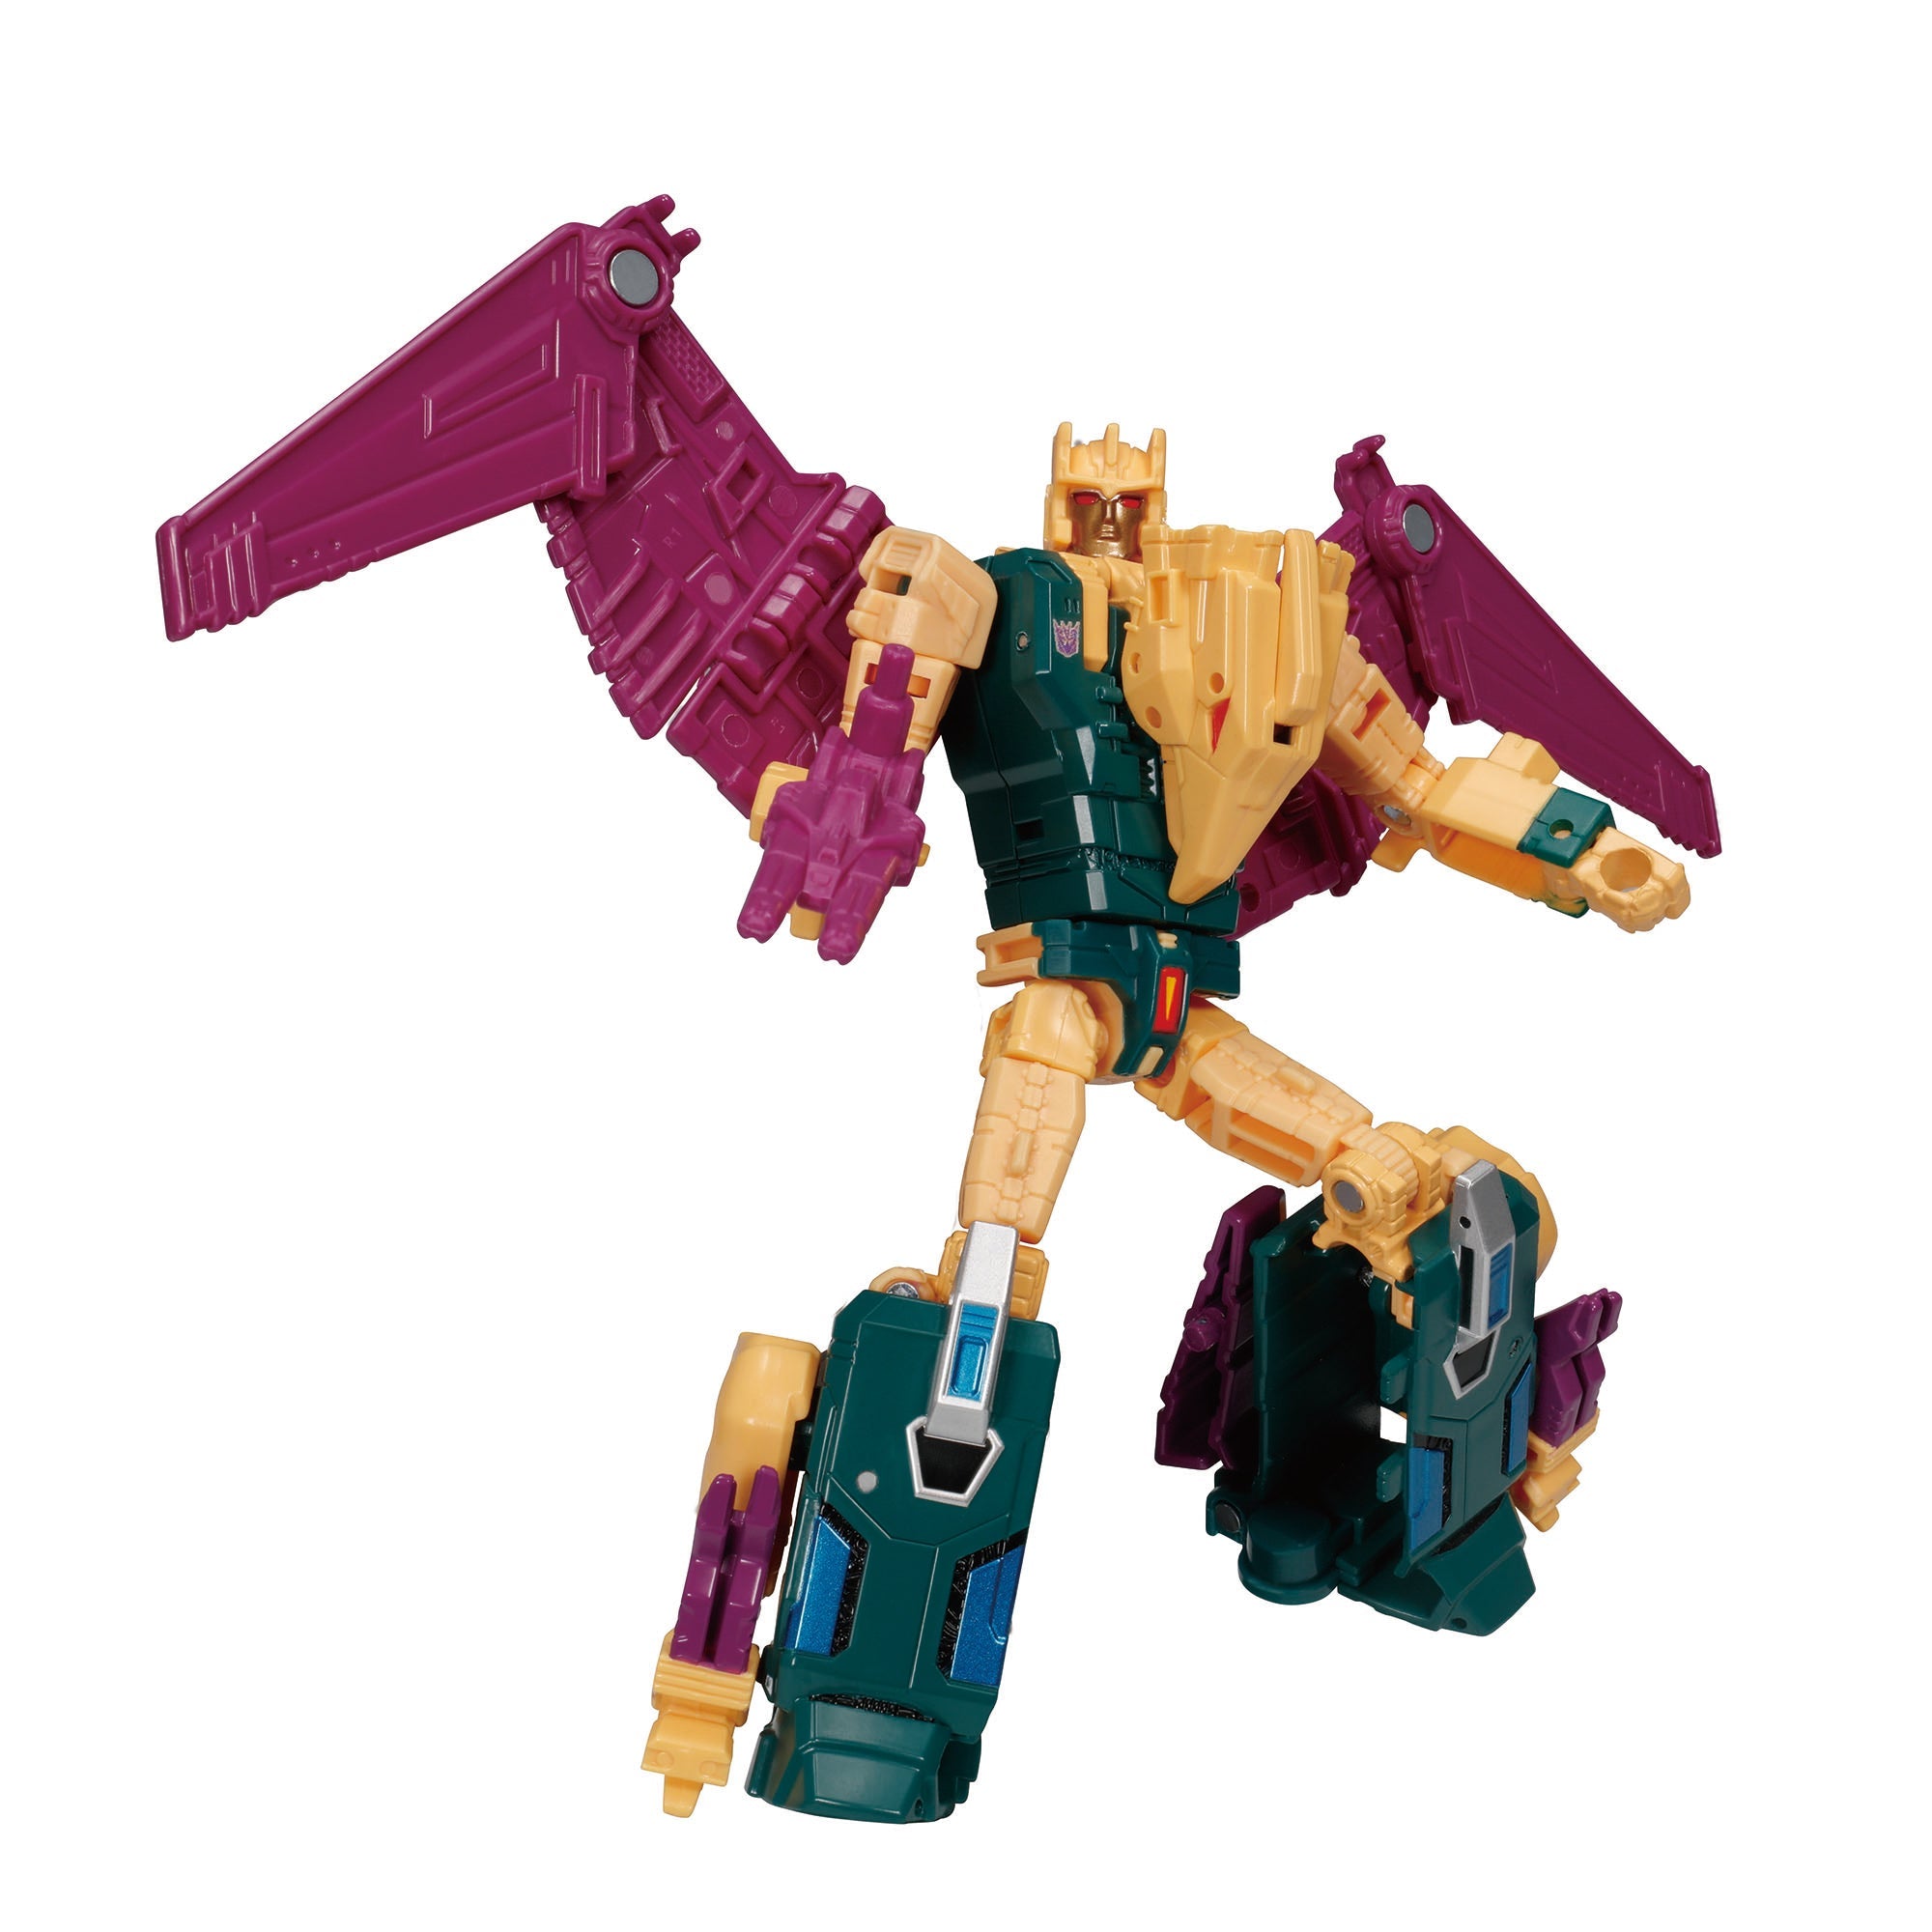 Transformers Takara Tomy Generations Selects TT-GS05 Abominus (Hasbro Pulse Exclusive)